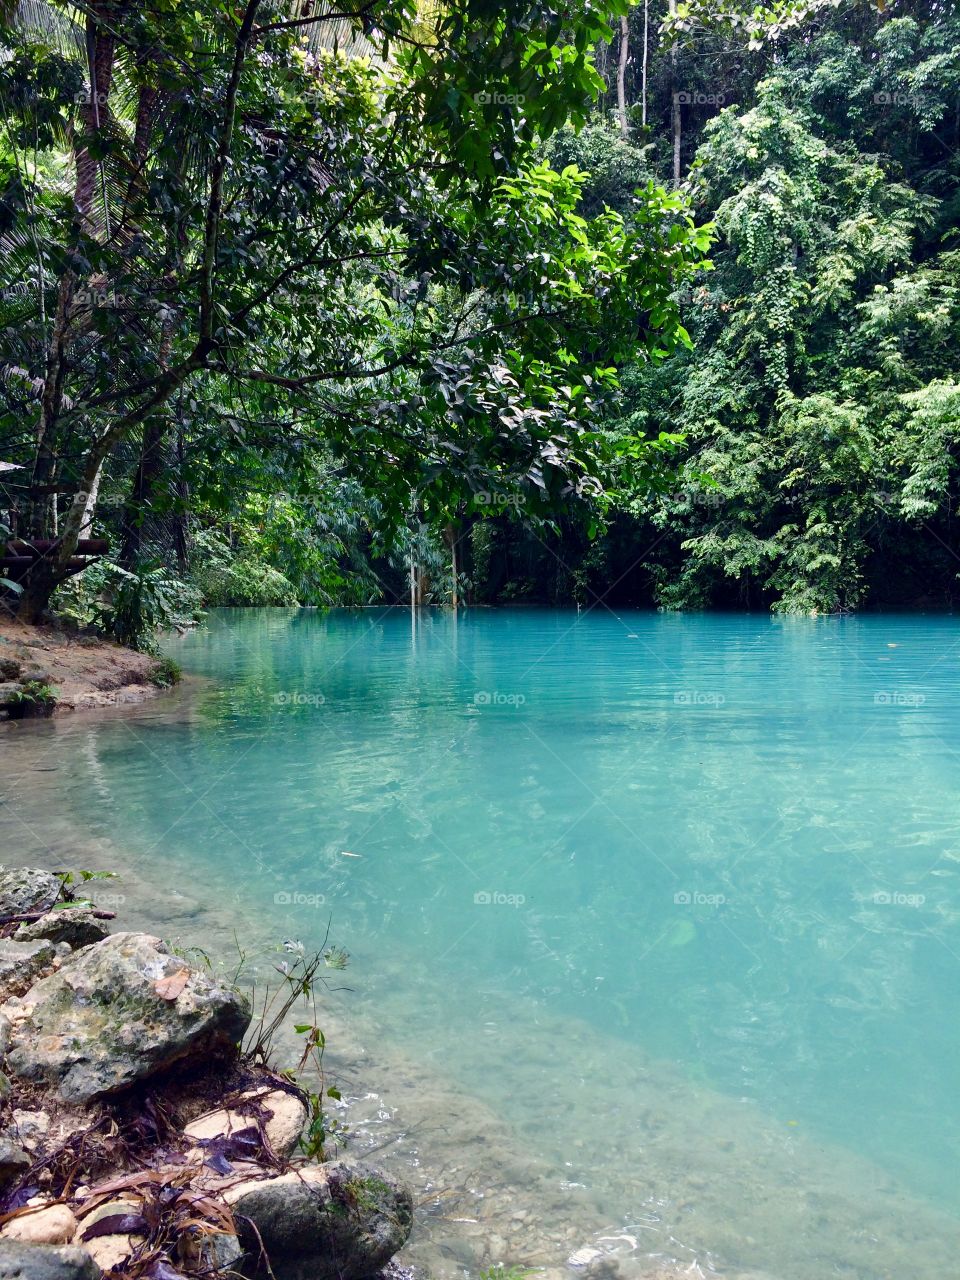 Fantastic river in the jungles of the island of Cebu. Philippines.